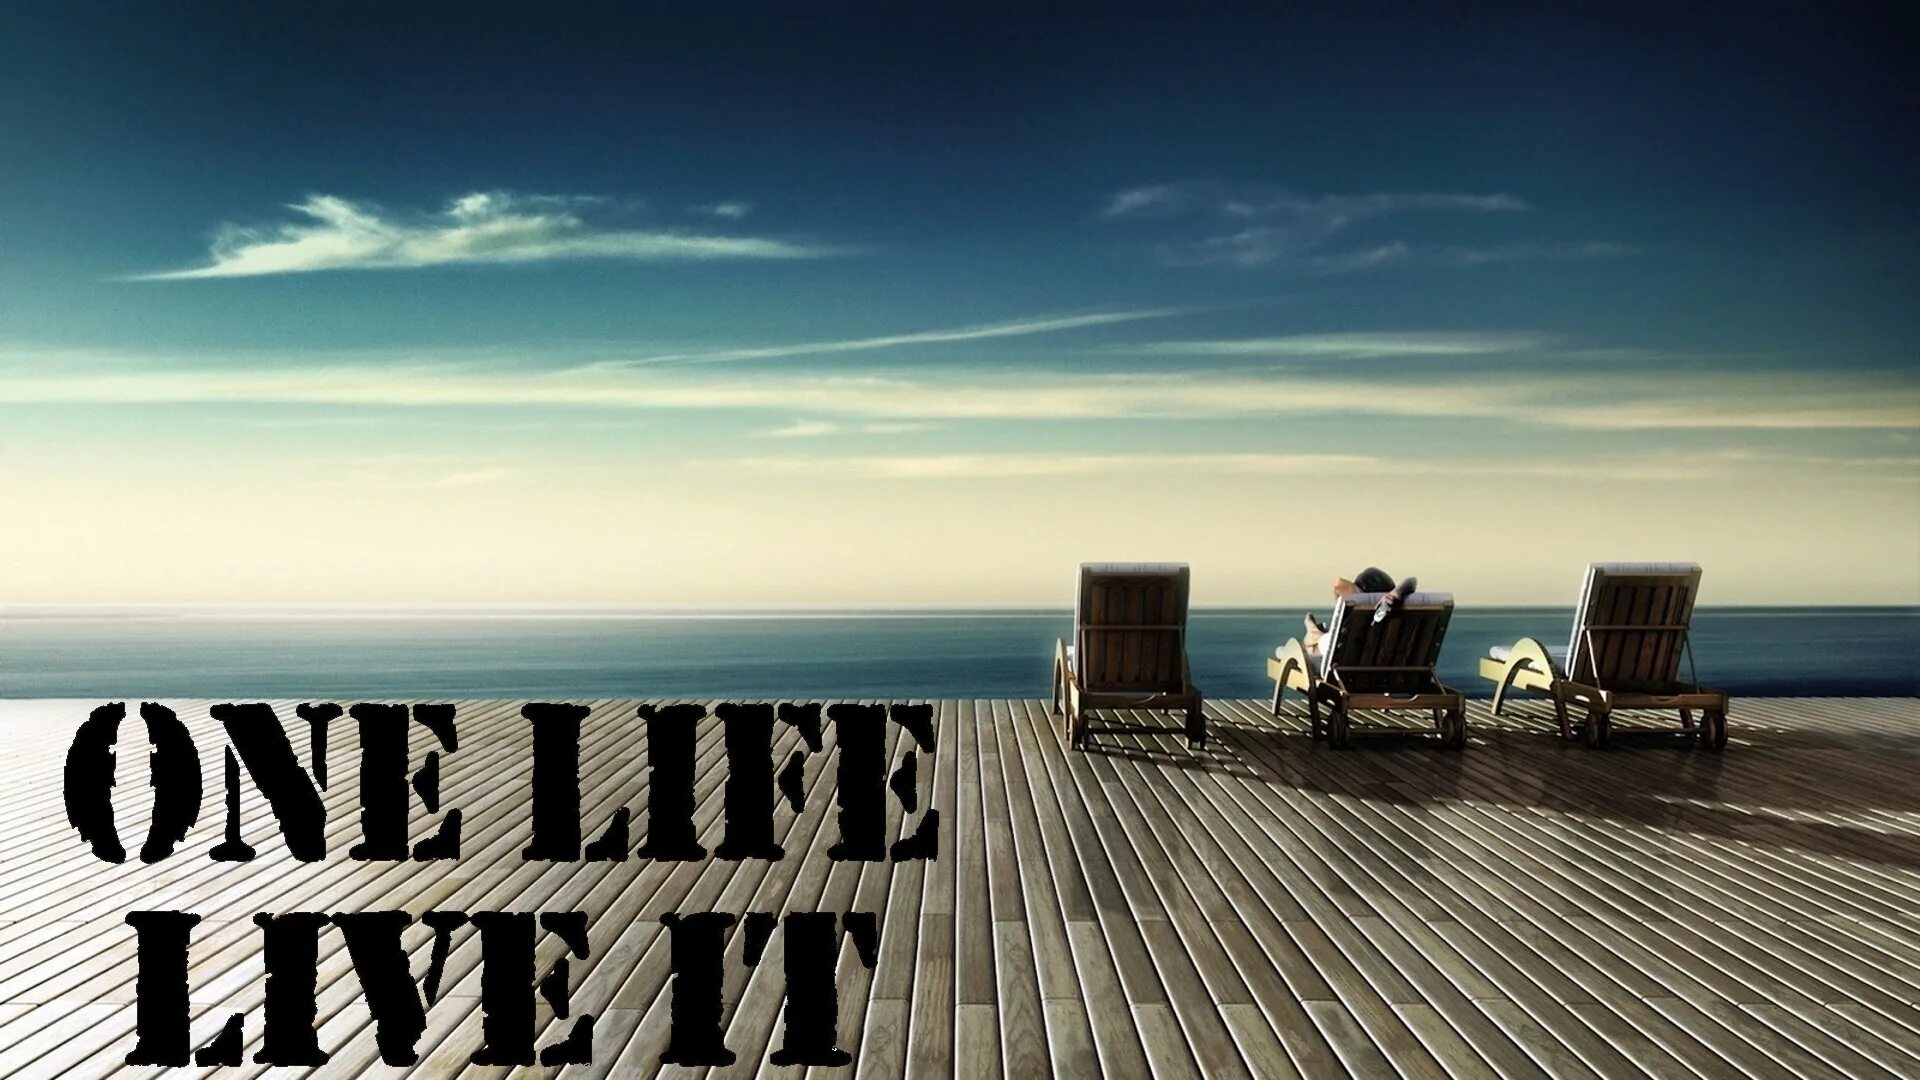 Live the Life. One Life to Live. Live by you. Live a Life by Design not by default. This life you need